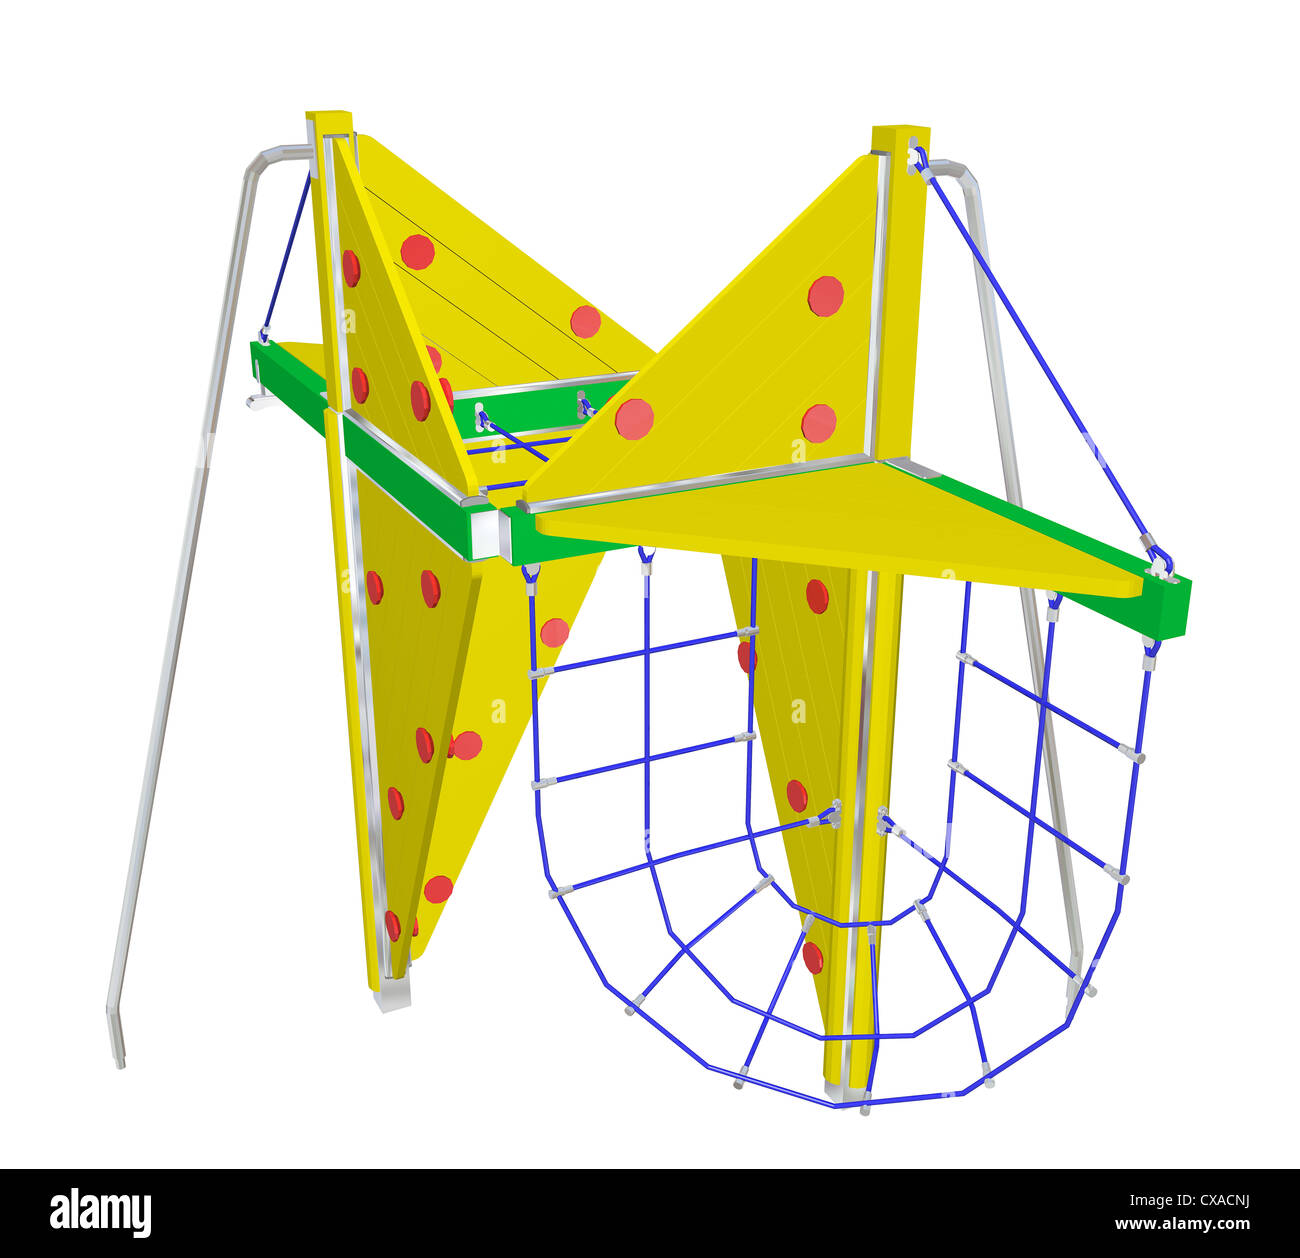 Play and climbing net, yellow and green, with red dots, 3D illustration, isolated against a white background. Stock Photo